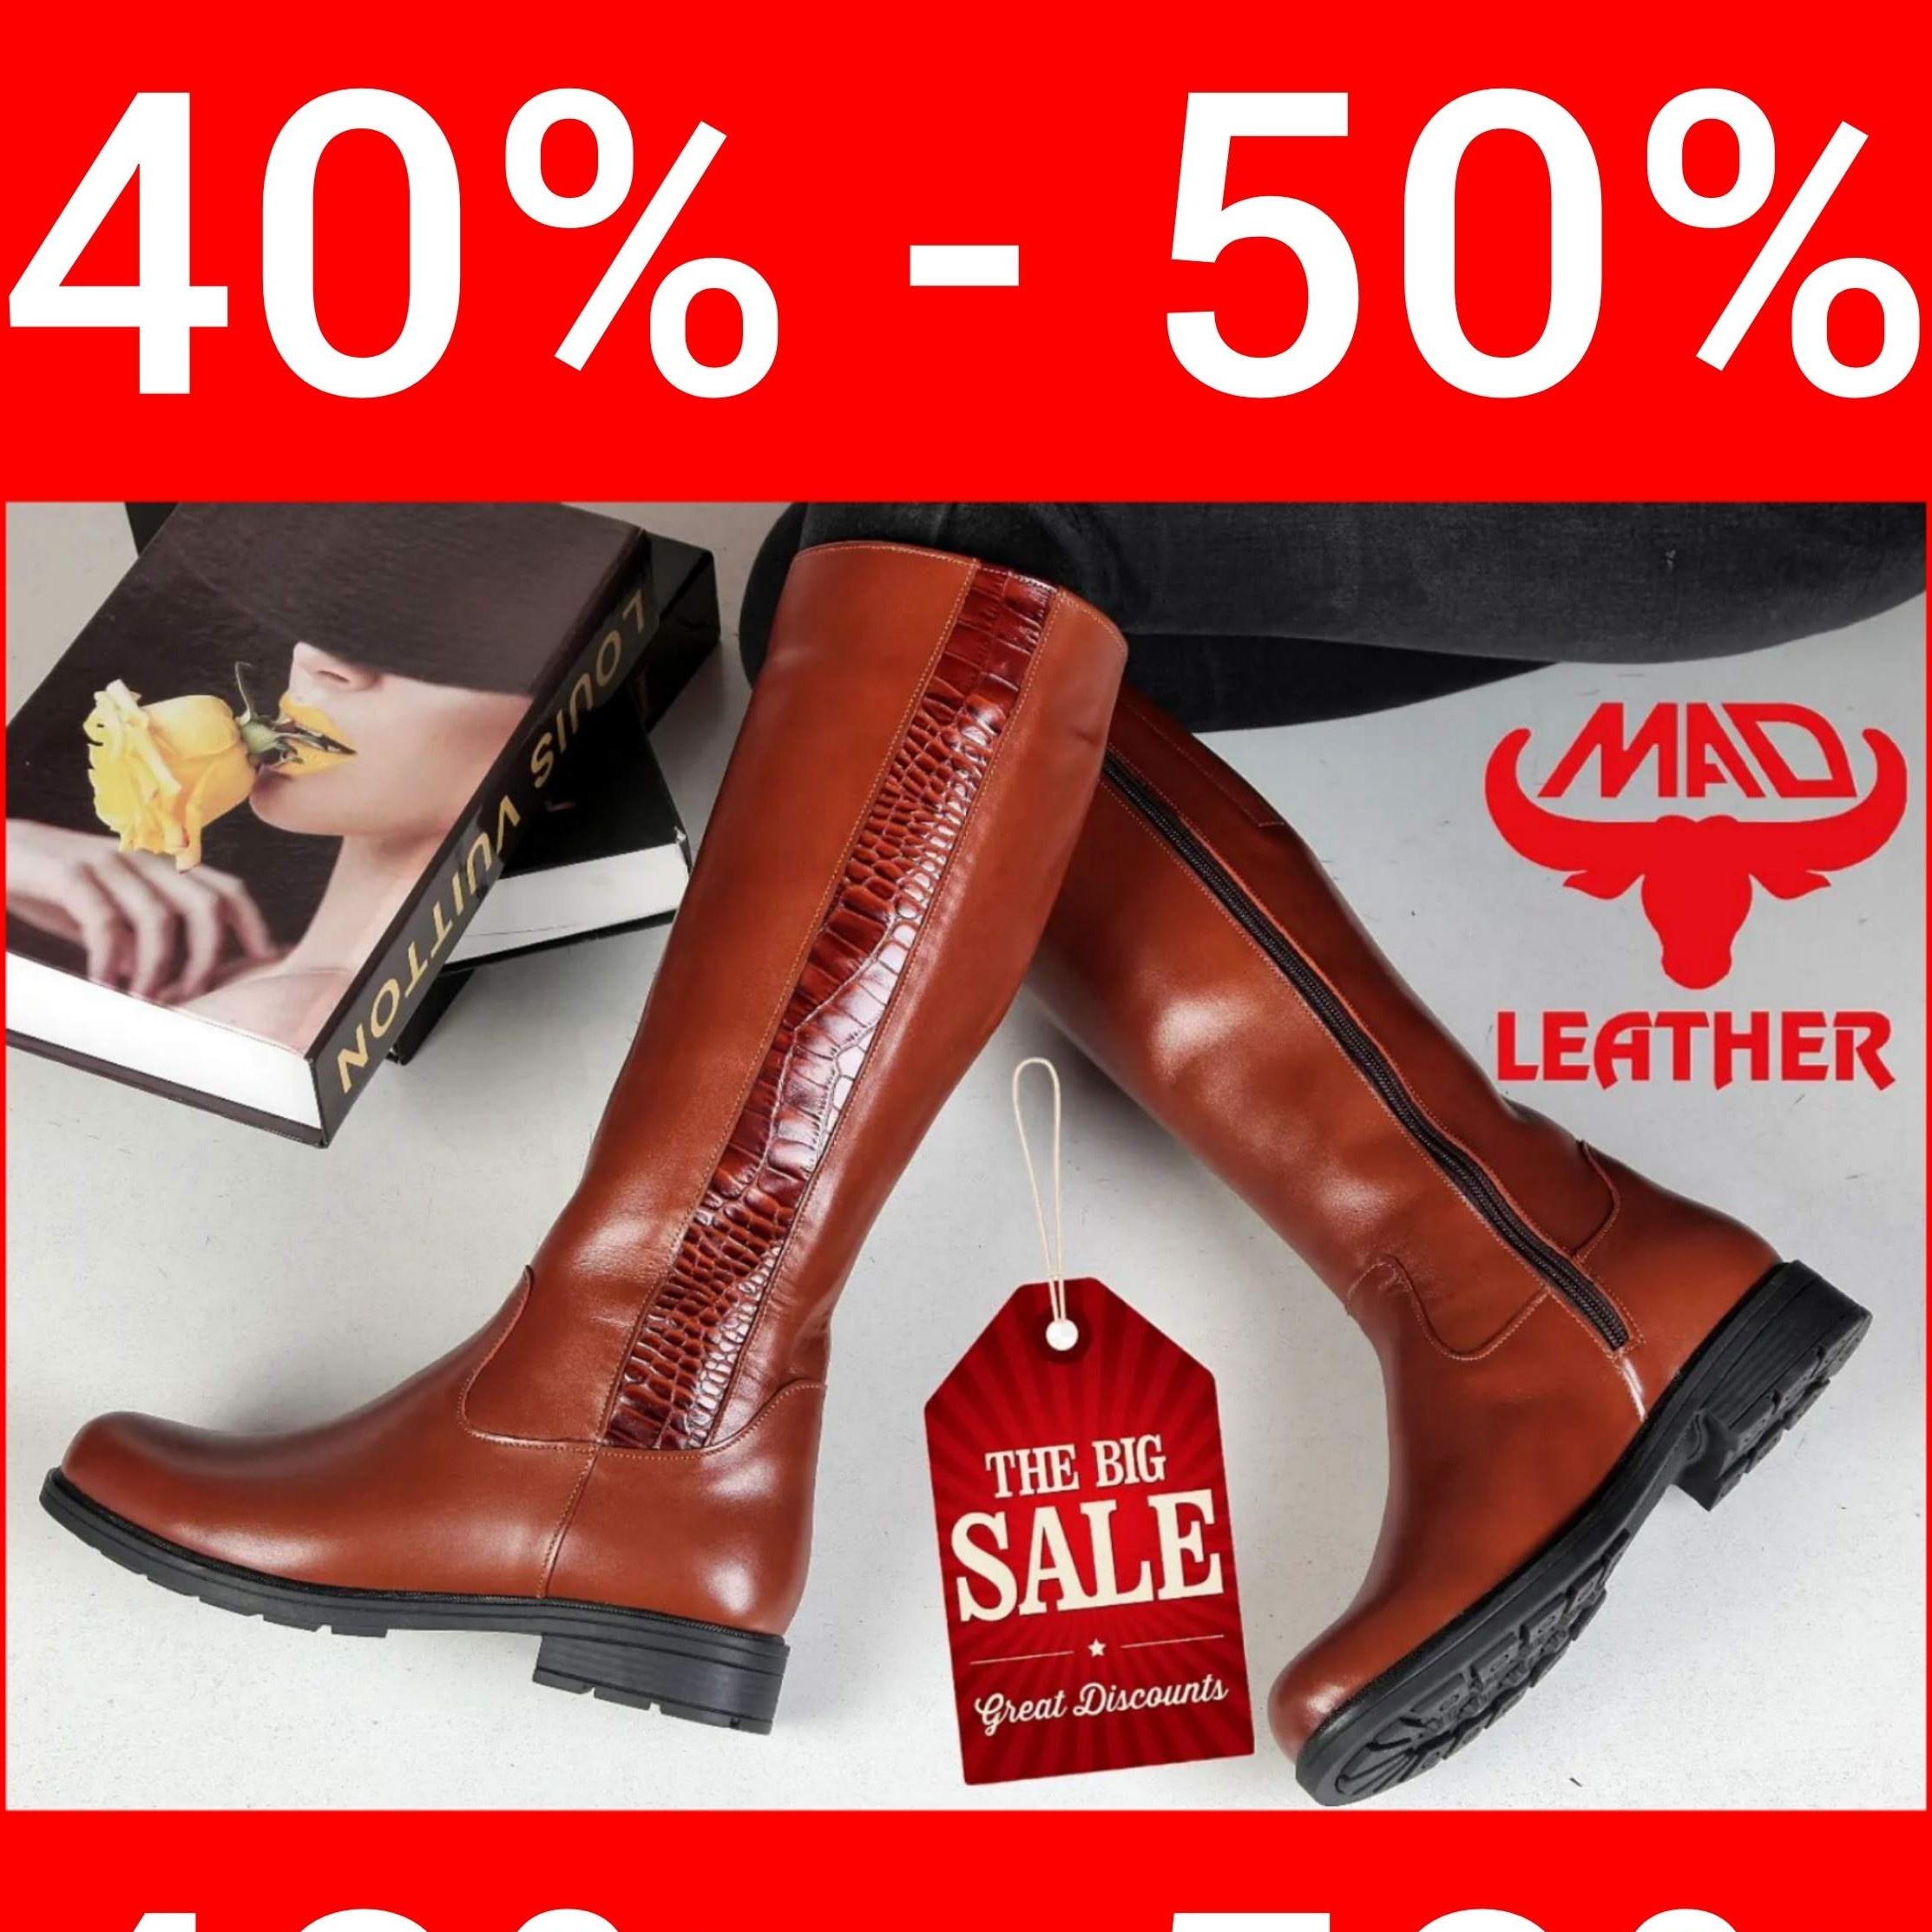 Synthetic leather boots purchase price + quality test